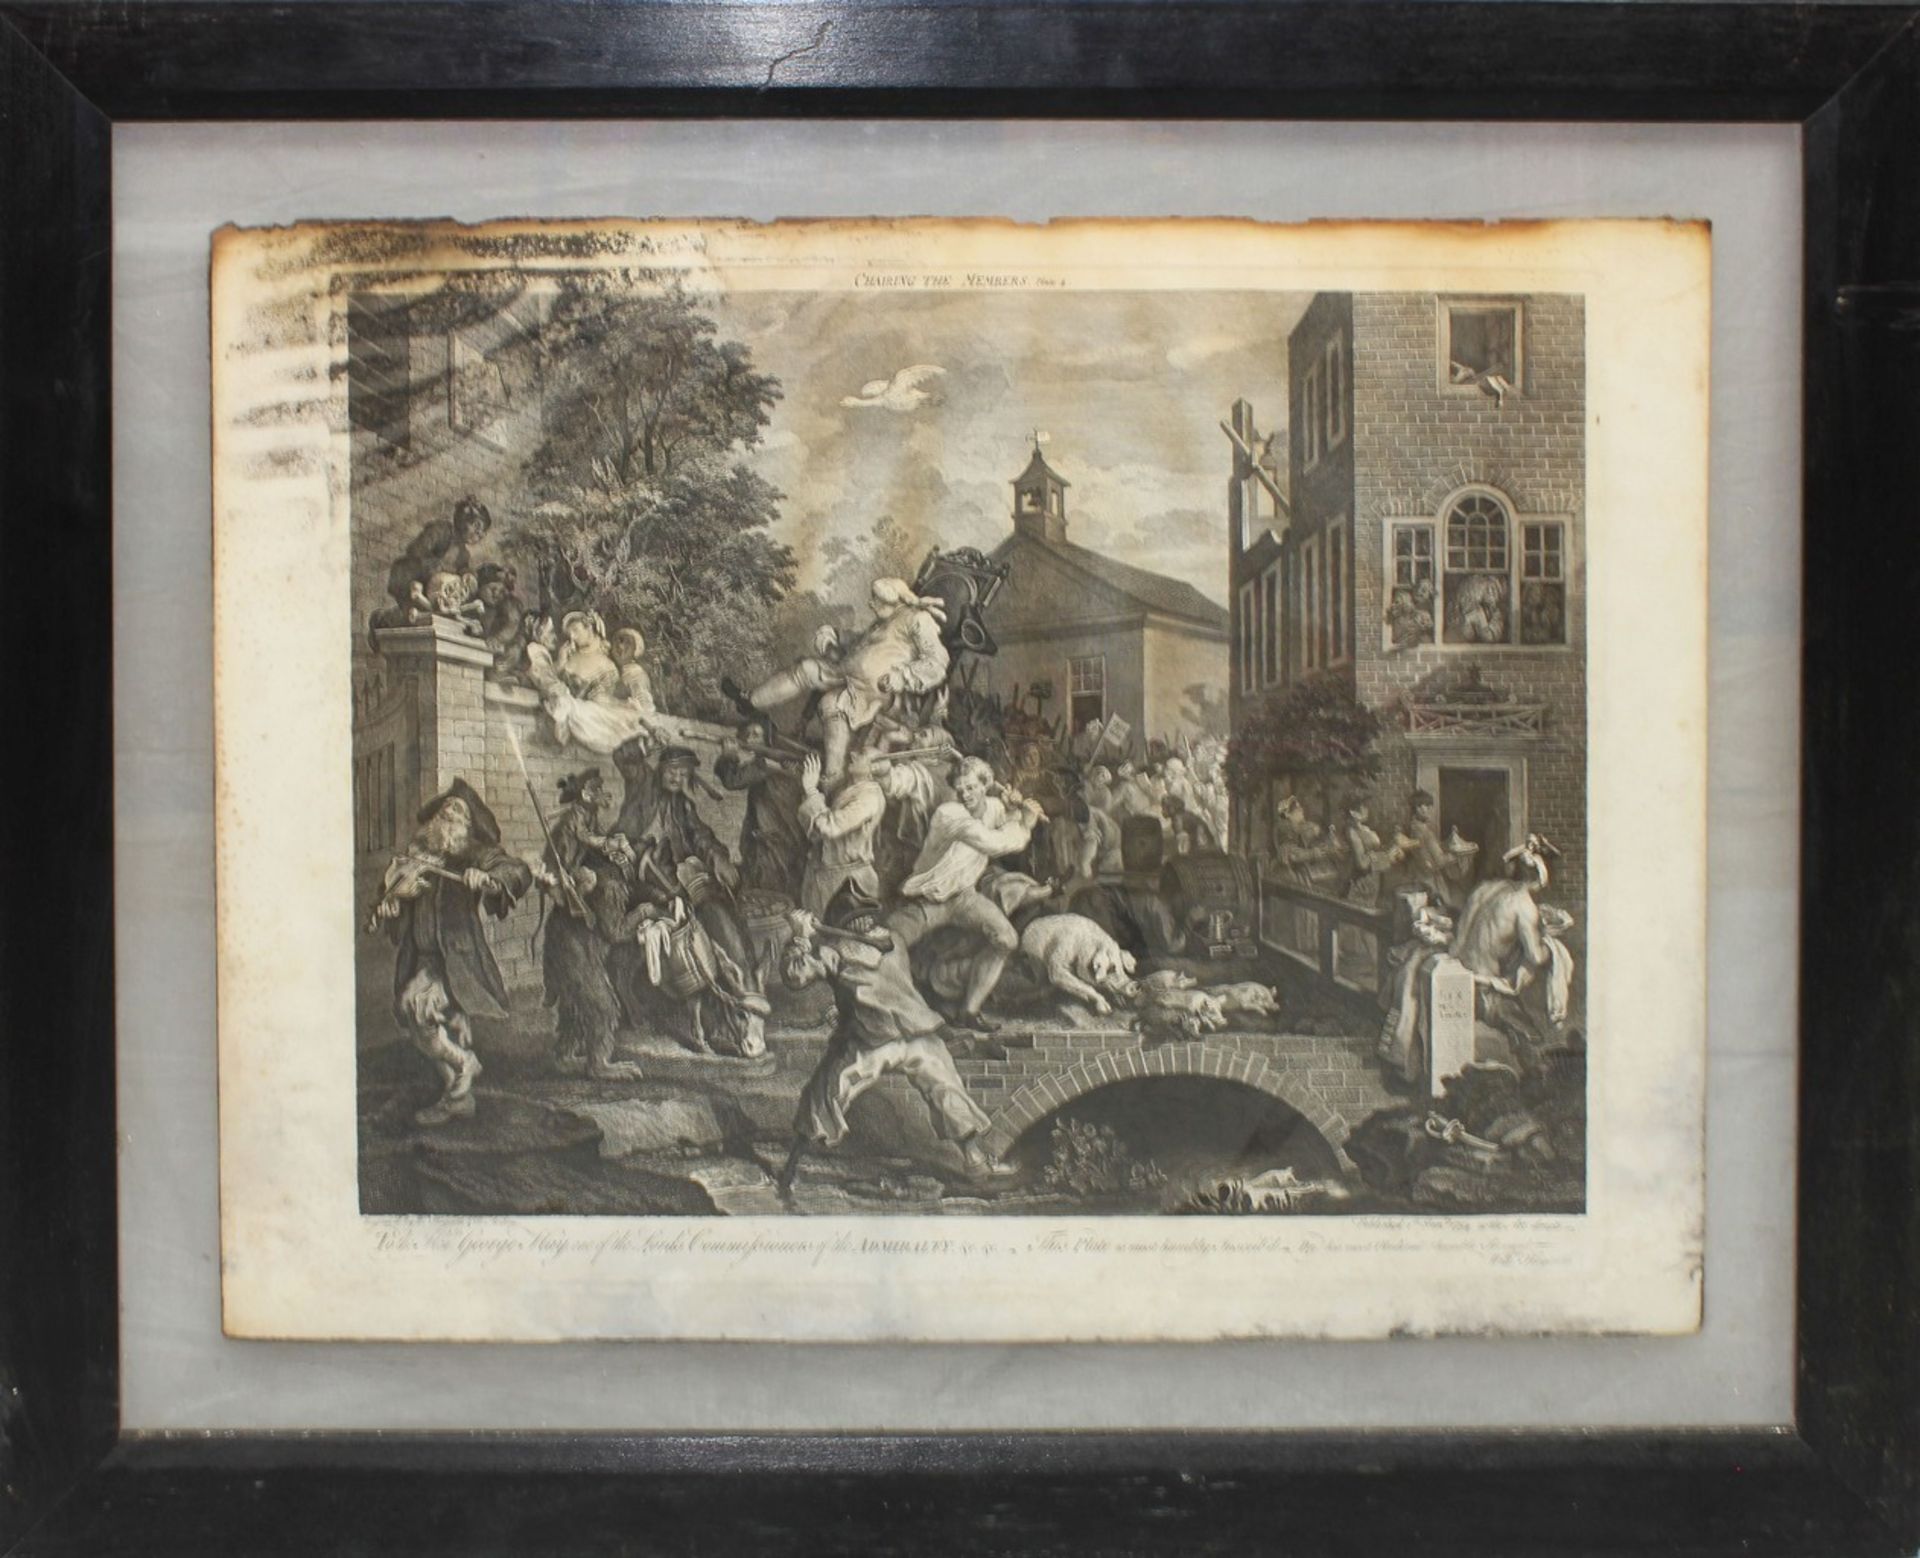 Tre stampe intitolate: An Election Entertainment, Chairng the members, the polling, cm. 65x50 - Image 2 of 3